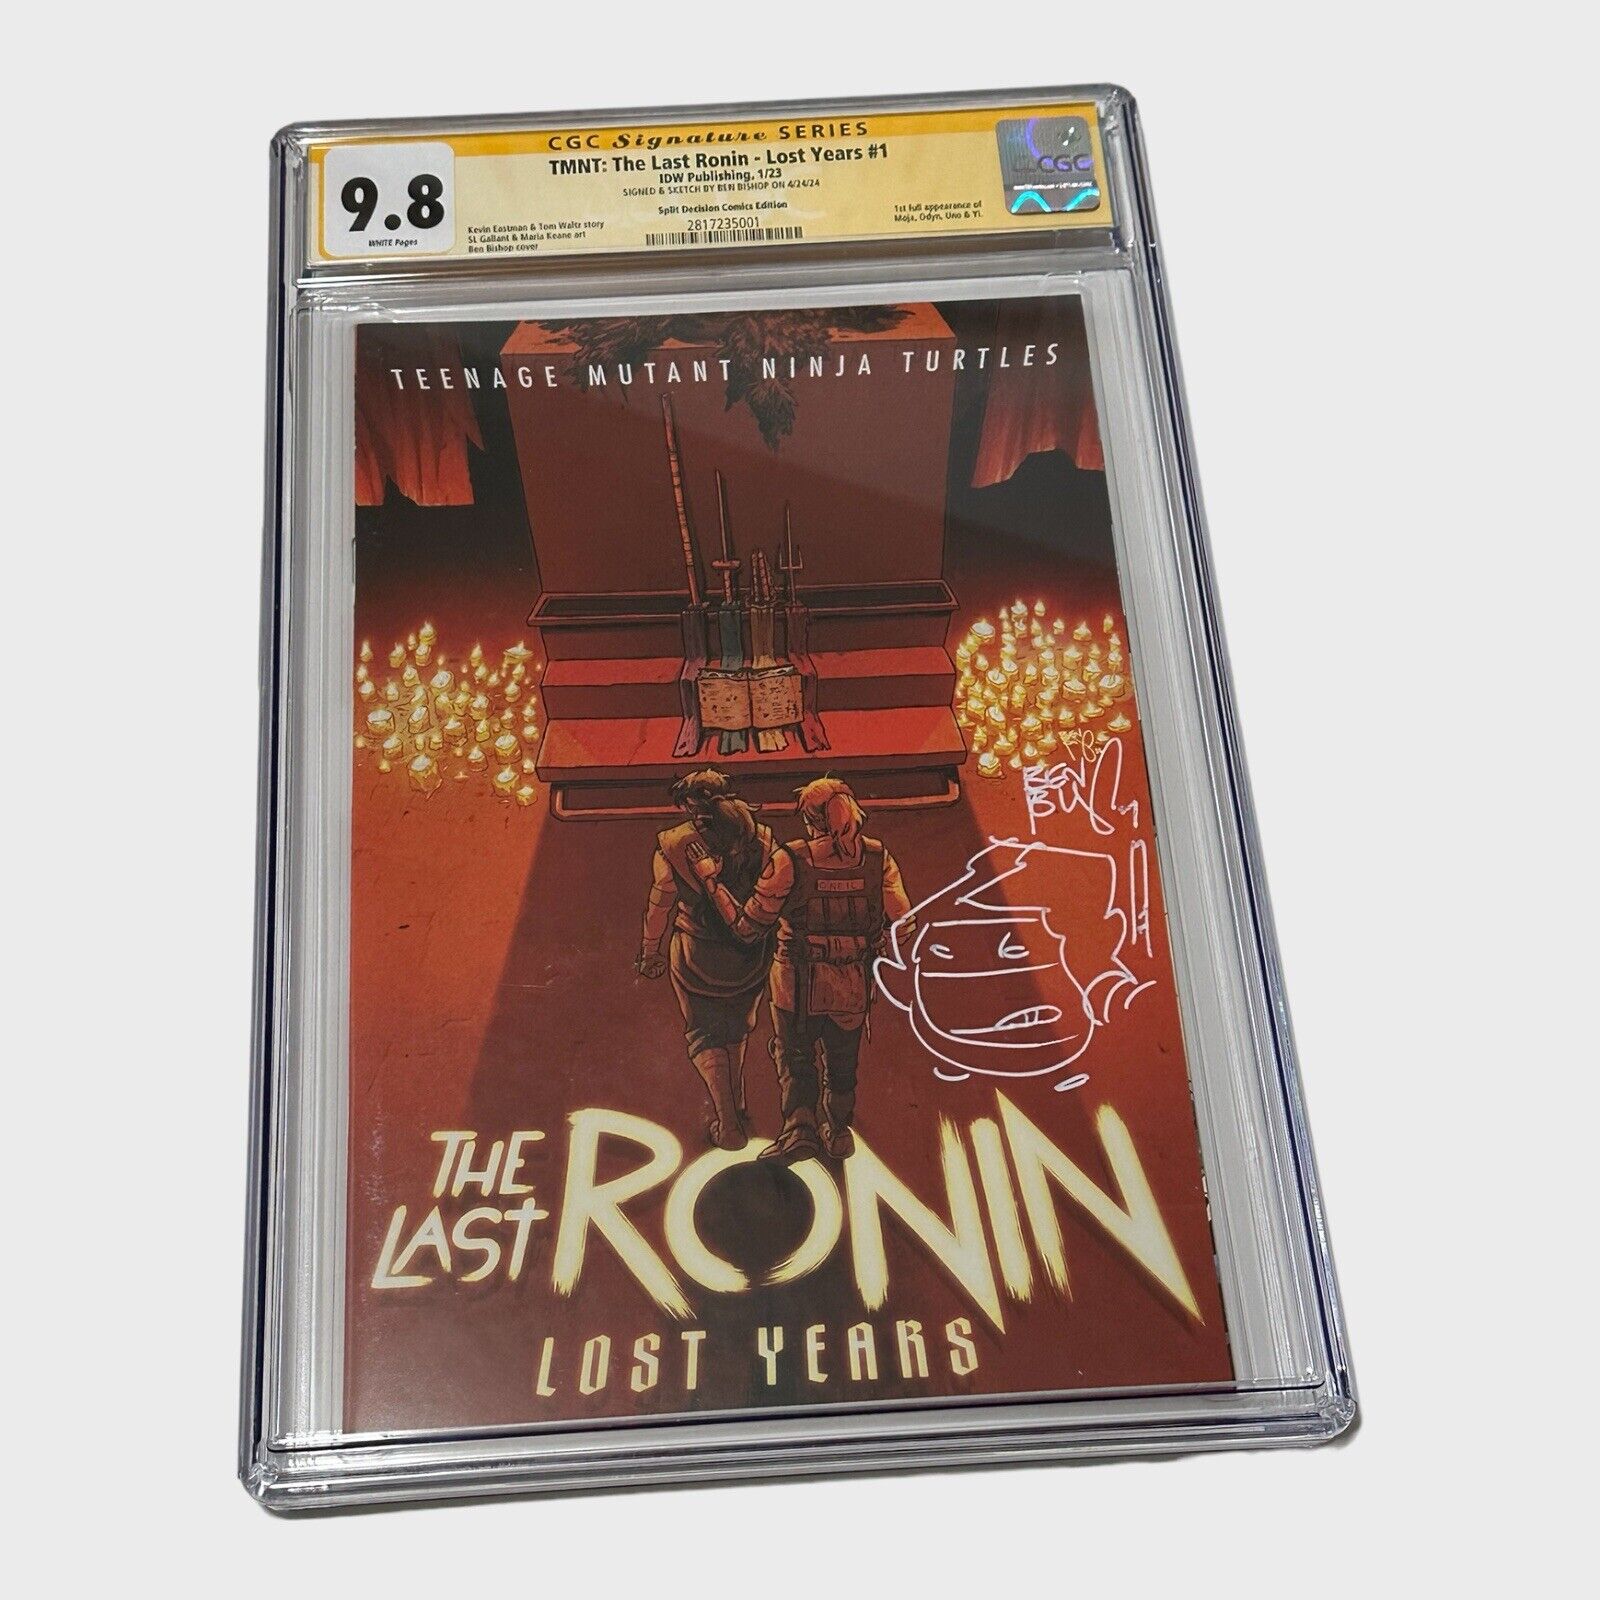 TMNT: The Last Ronin - Lost Years #1 - CGC SS 9.8 Signed & Sketch by Ben Bishop